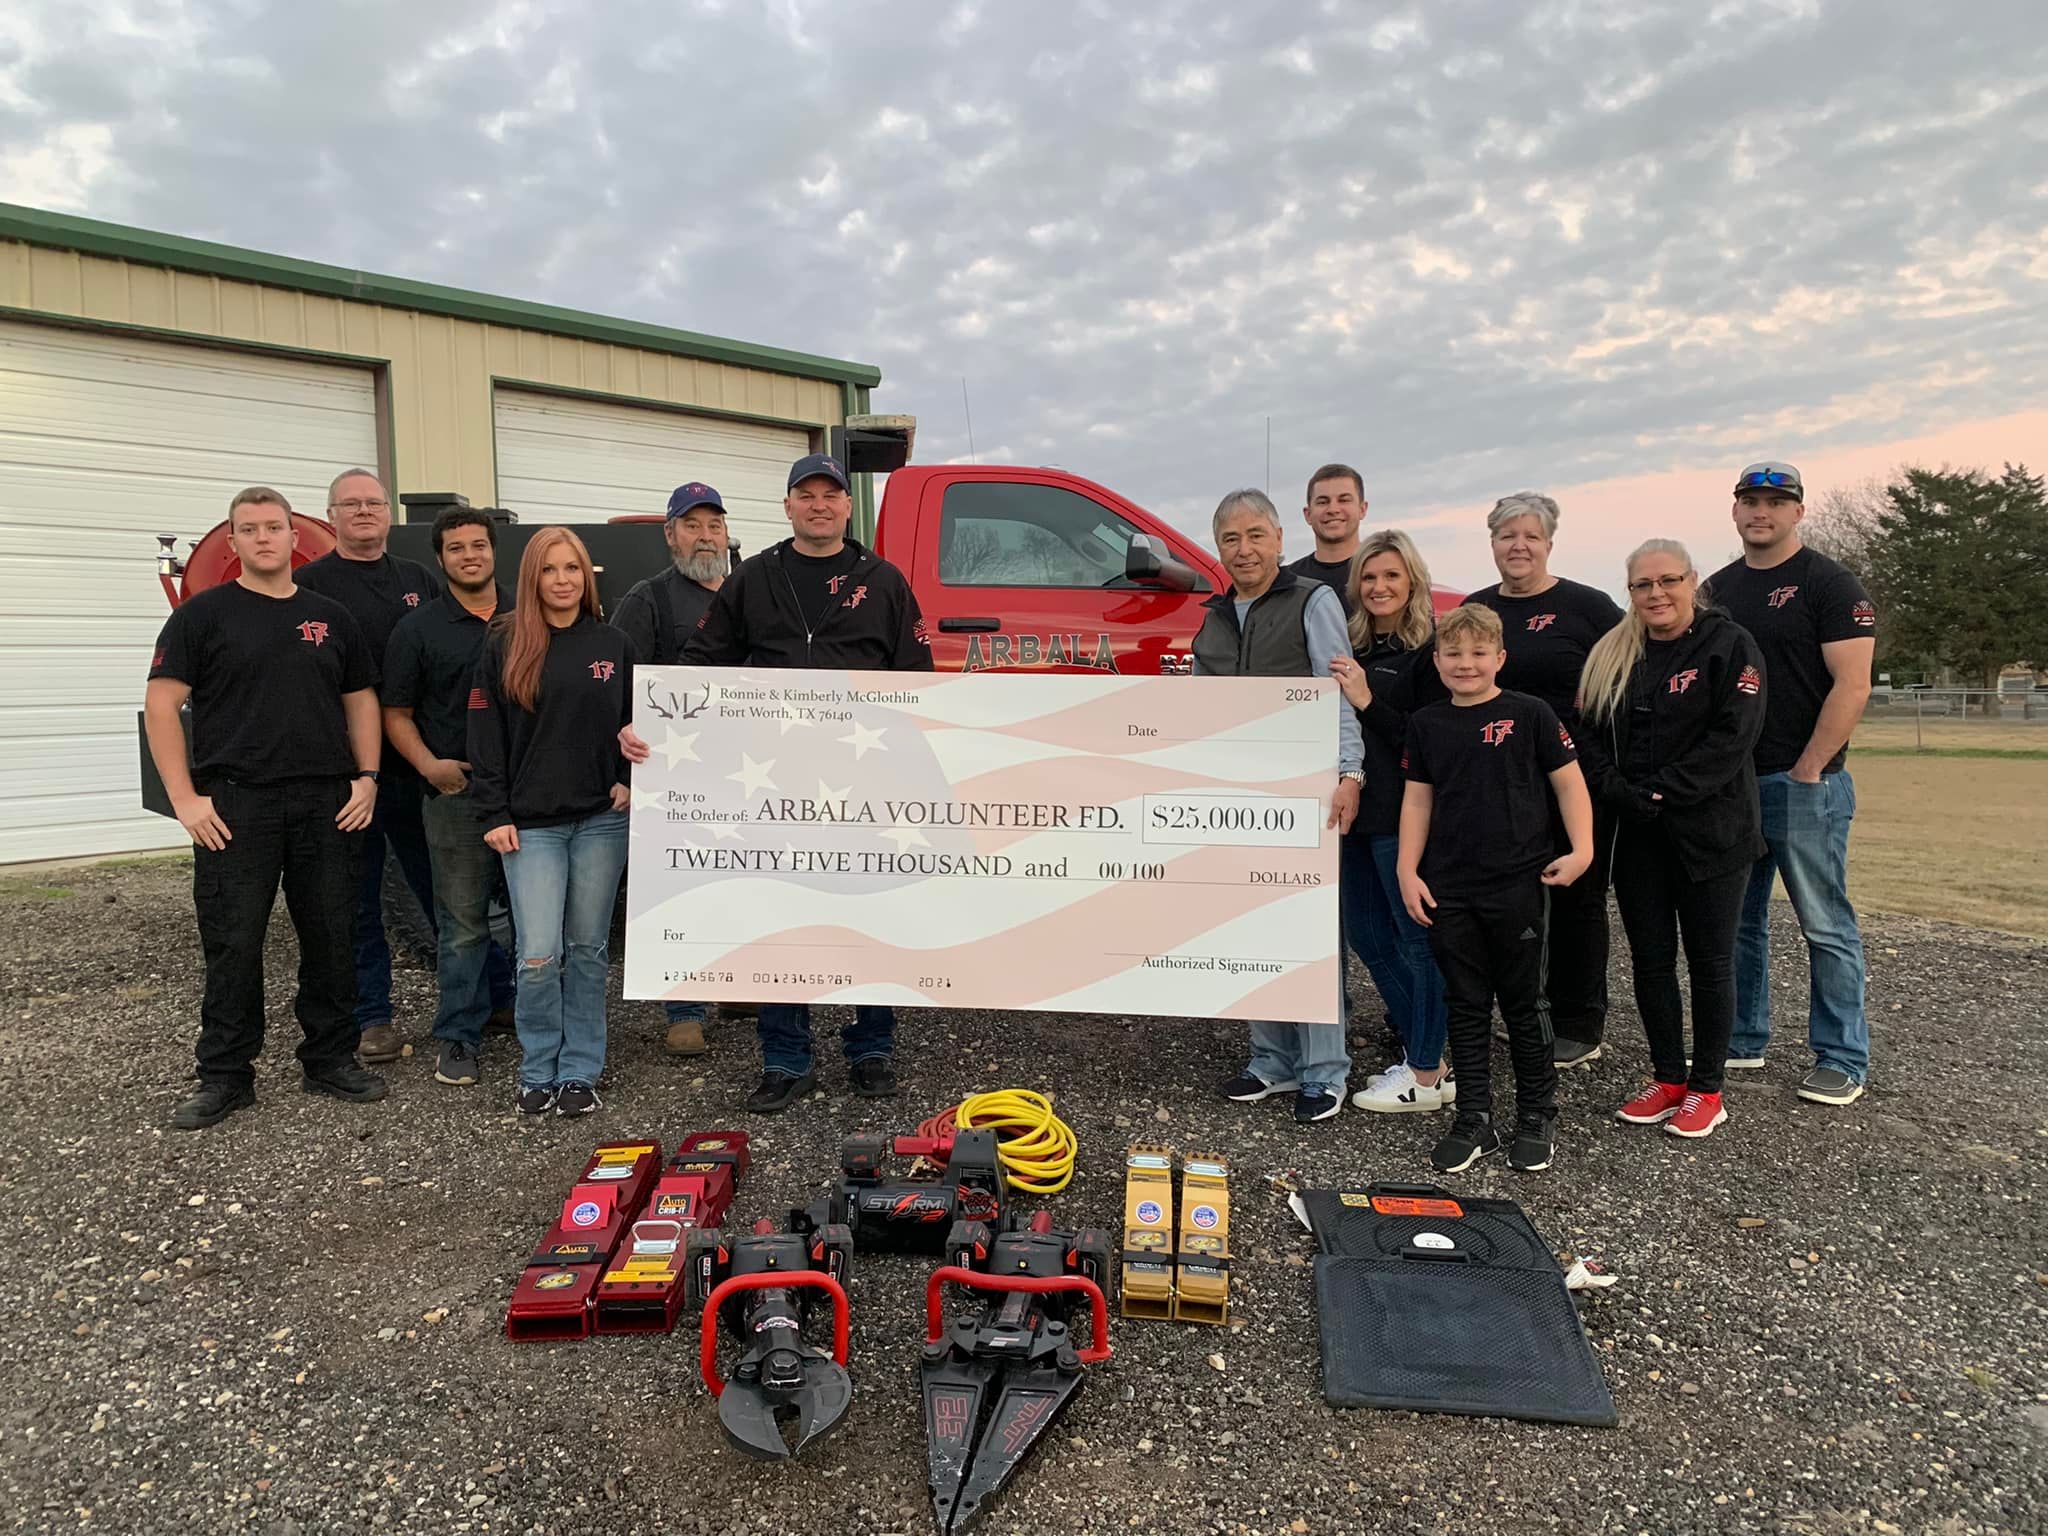 Arbala VFD ‘jaws of life’ tools funded thanks to $30k donation